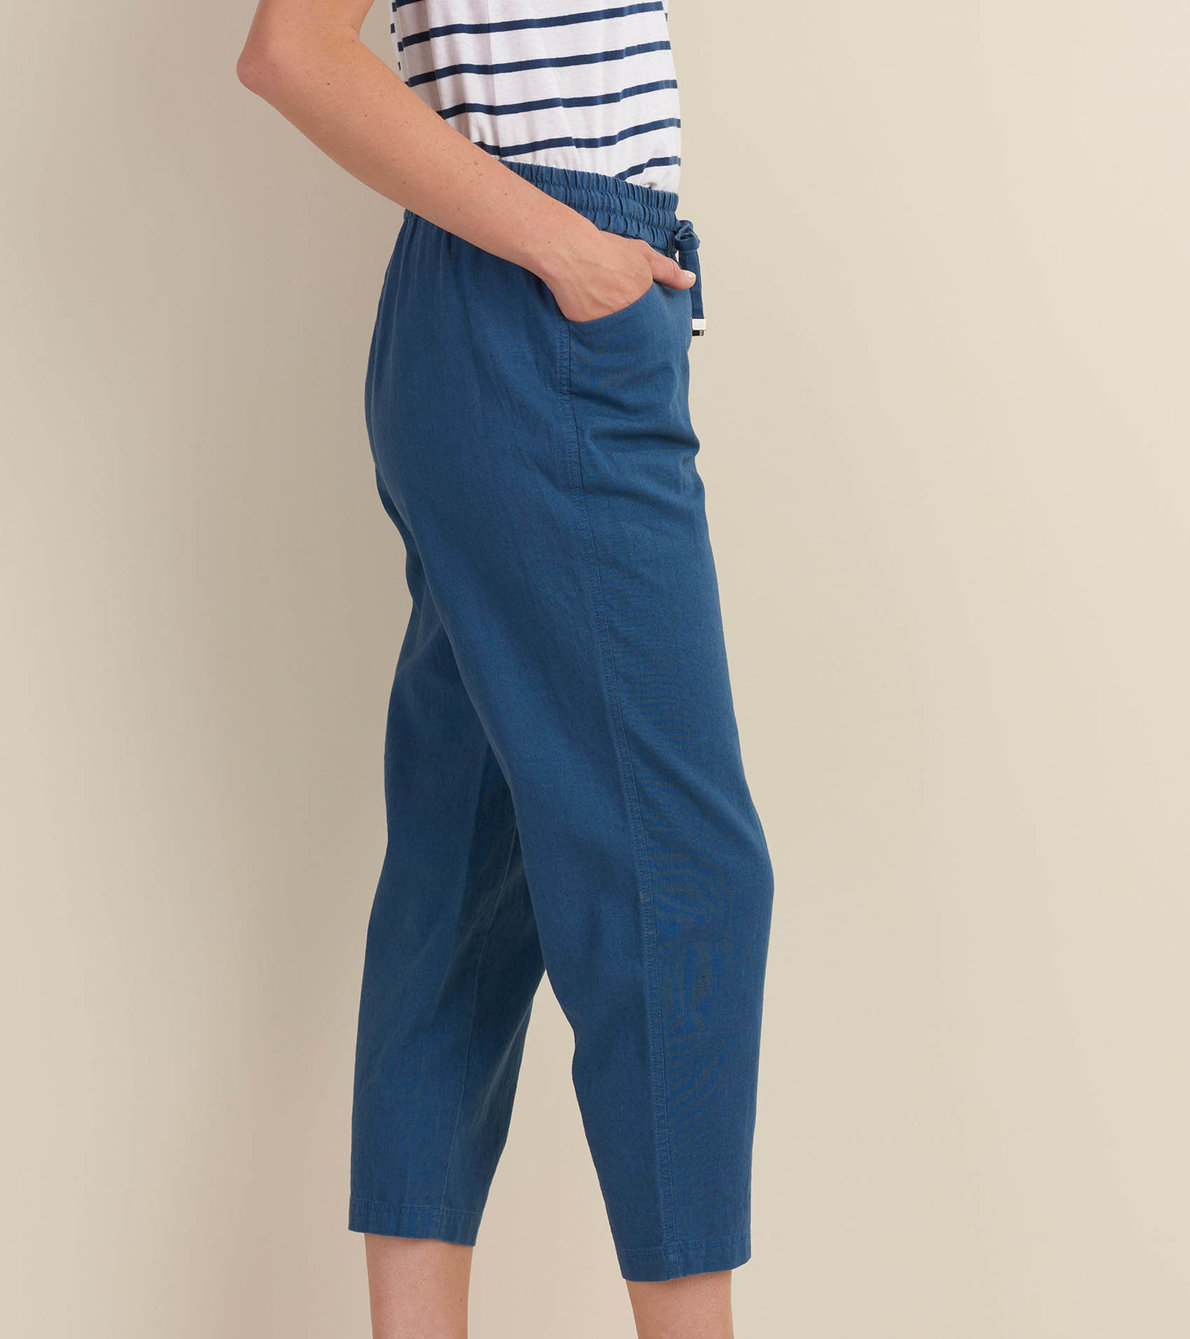 View larger image of Sierra Cotton Linen Pants - Navy